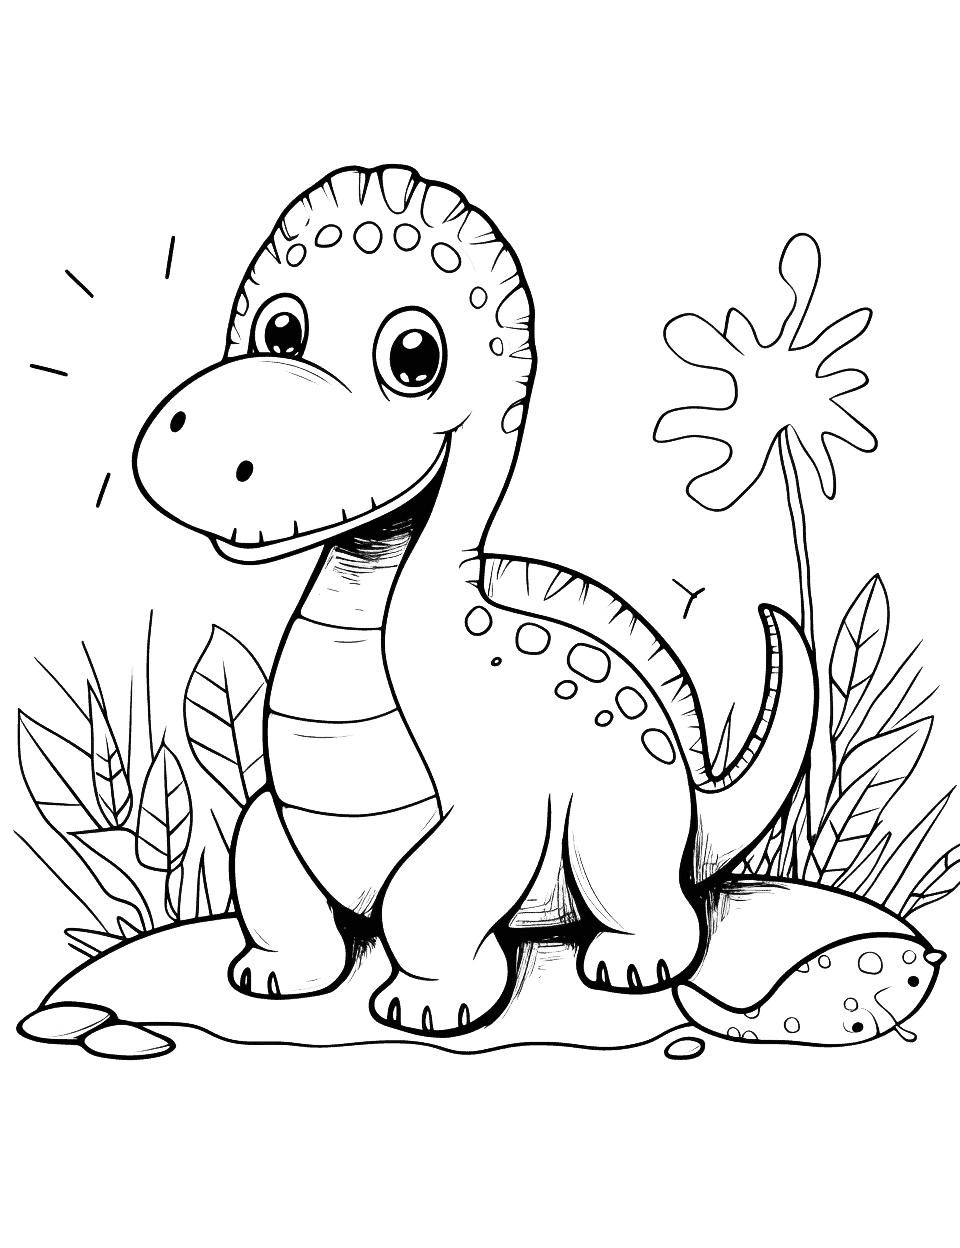 Cute Dino Friend Coloring Page - Cartoonish, cute dinosaur playing outdoors.